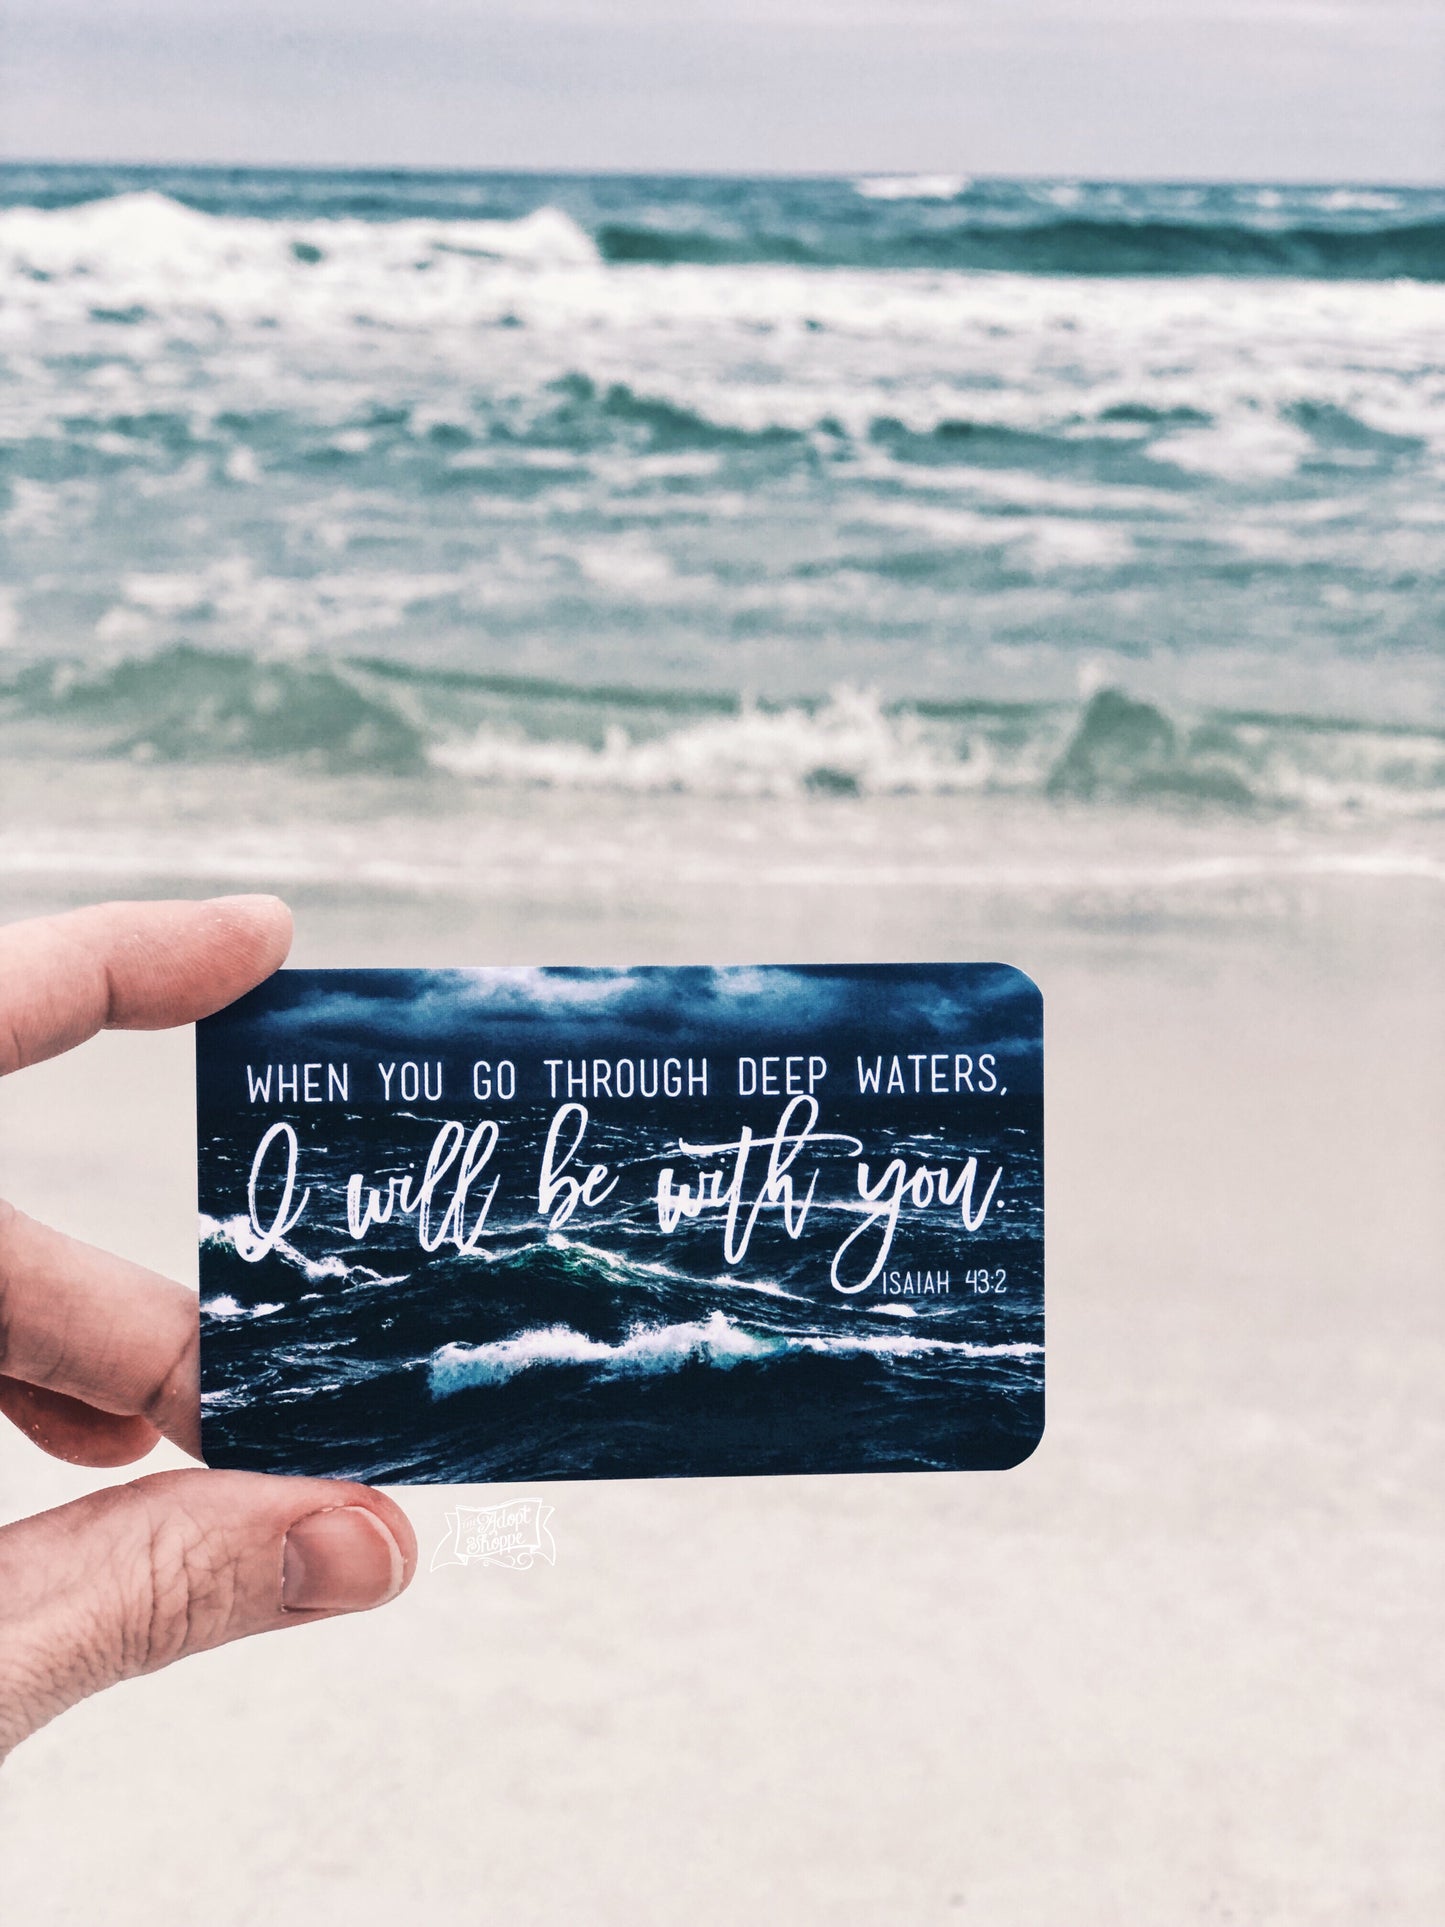 when you go through deep waters, I will be with you (Isaiah 43:2) #TheAdoptShoppecard